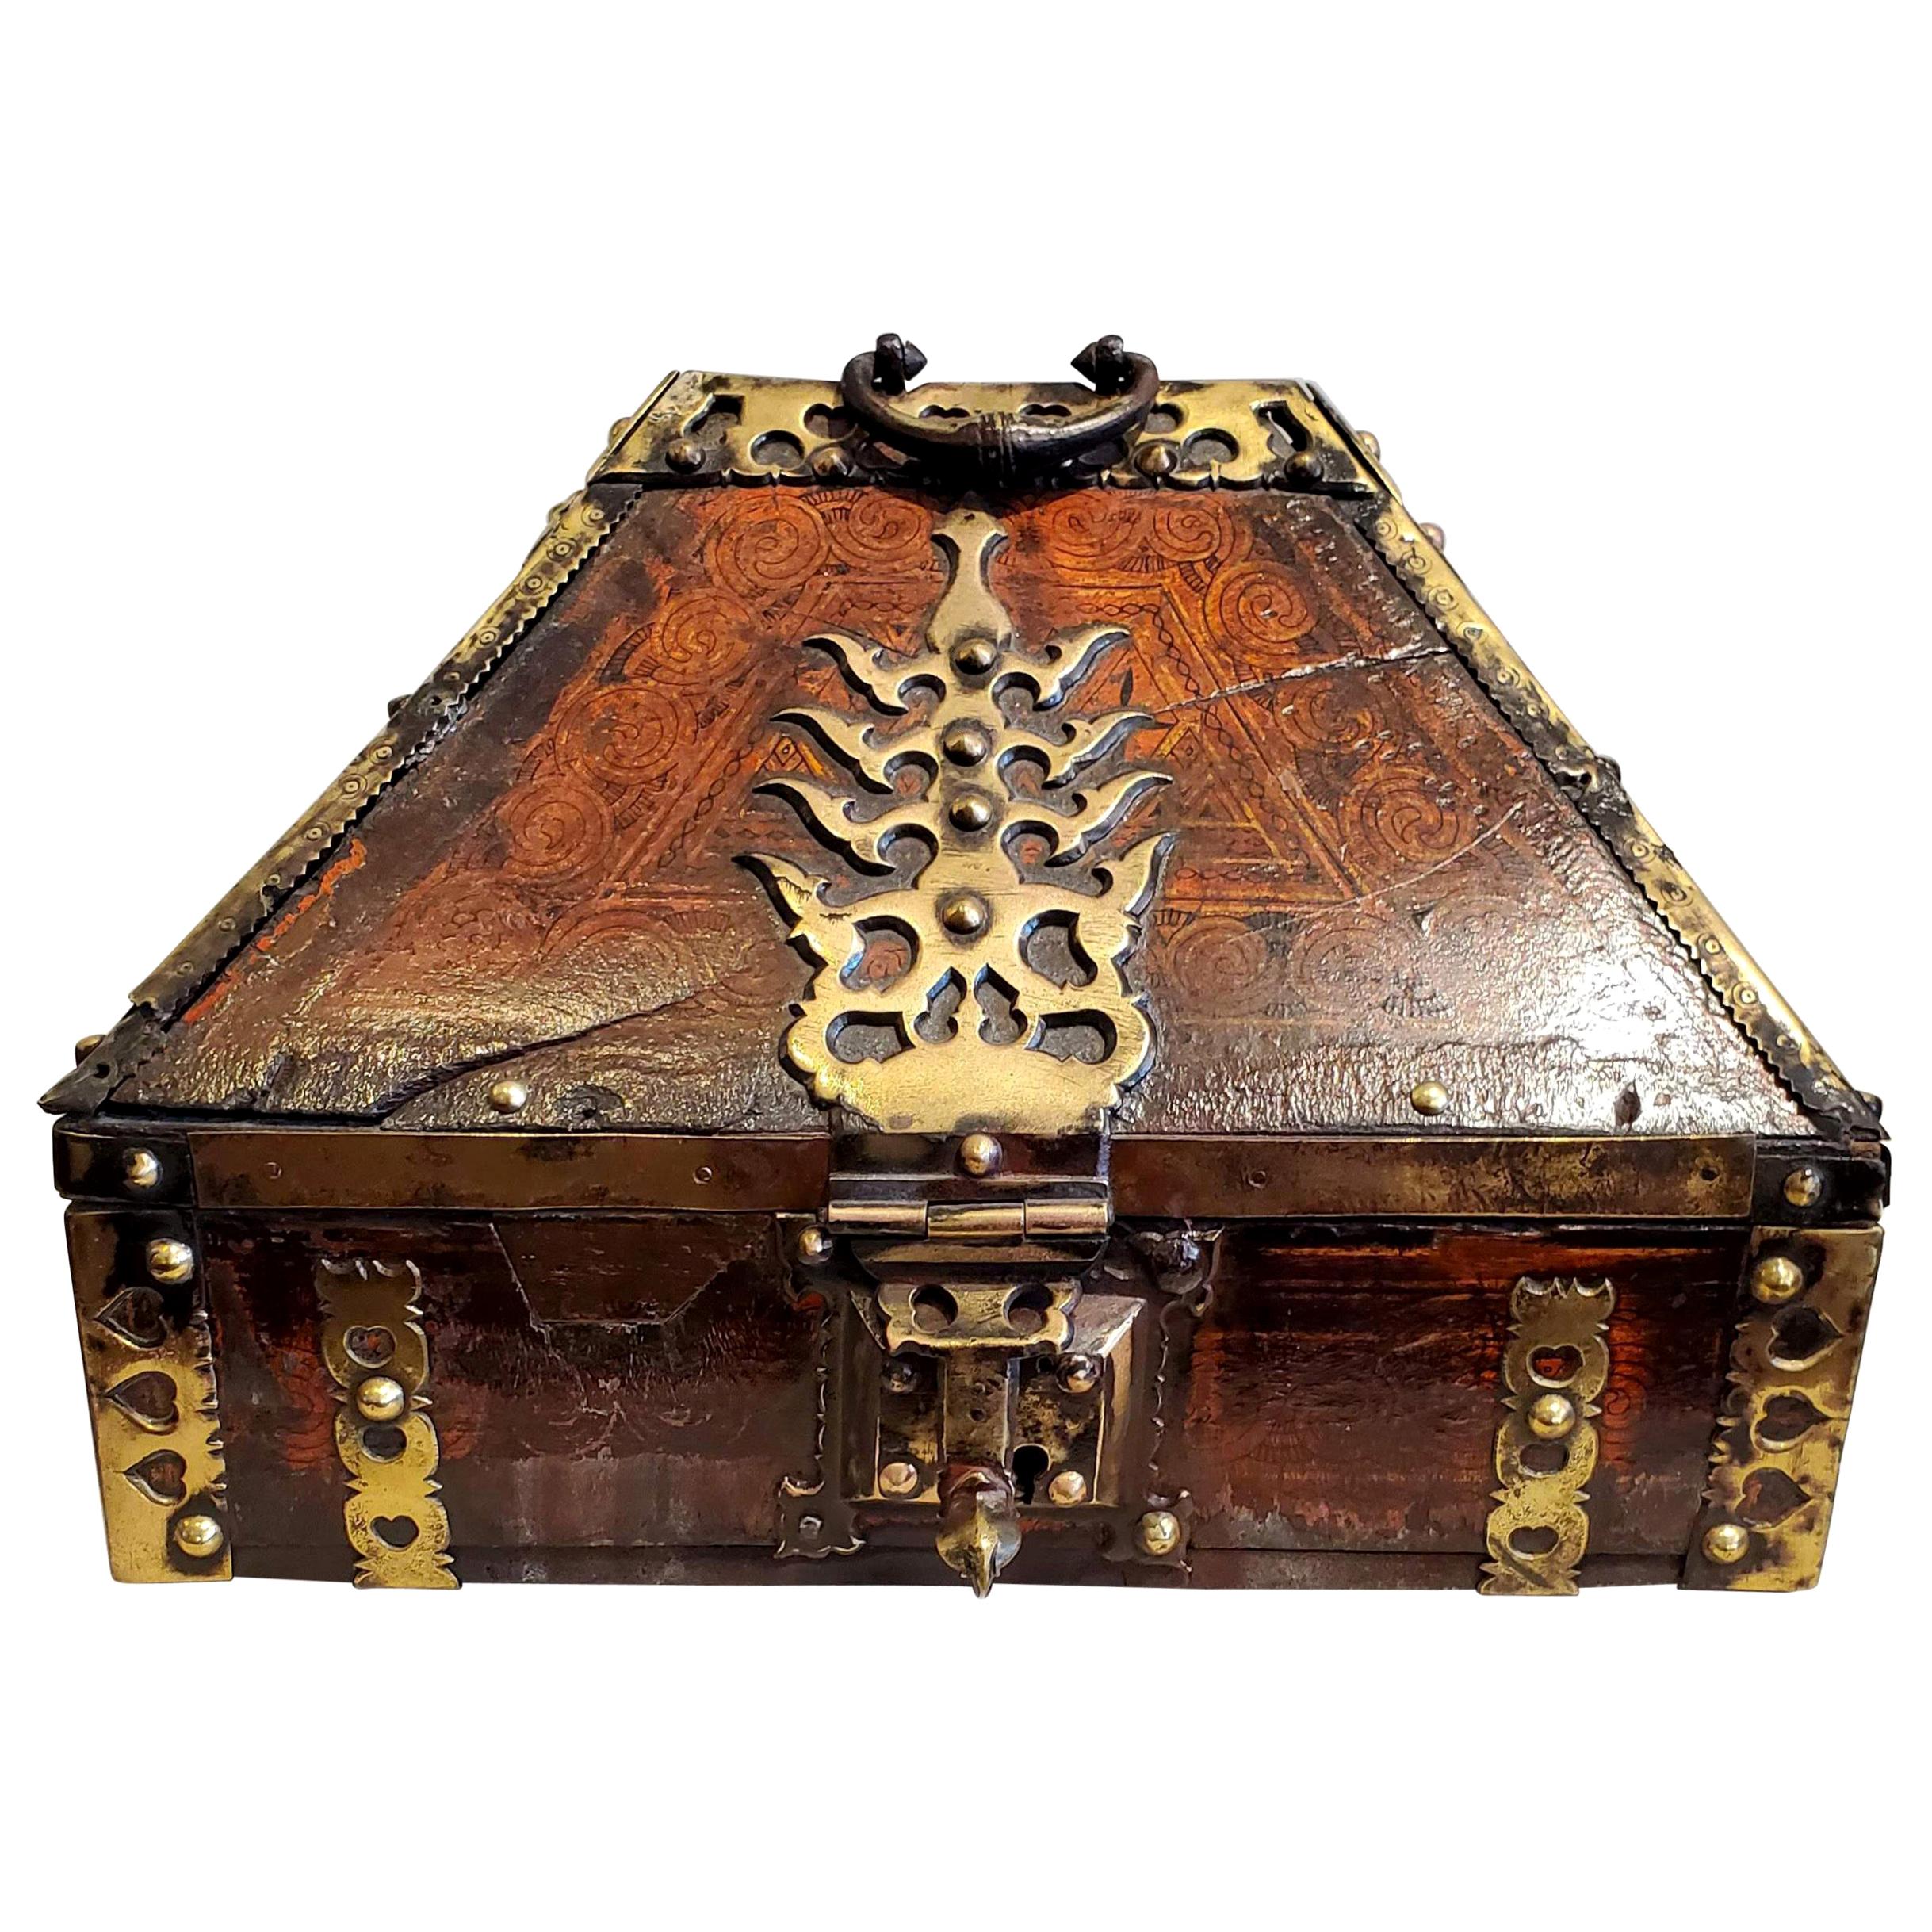 Late 18th Century Lacquered Teak with Decorative Brass Indian Dowry Box